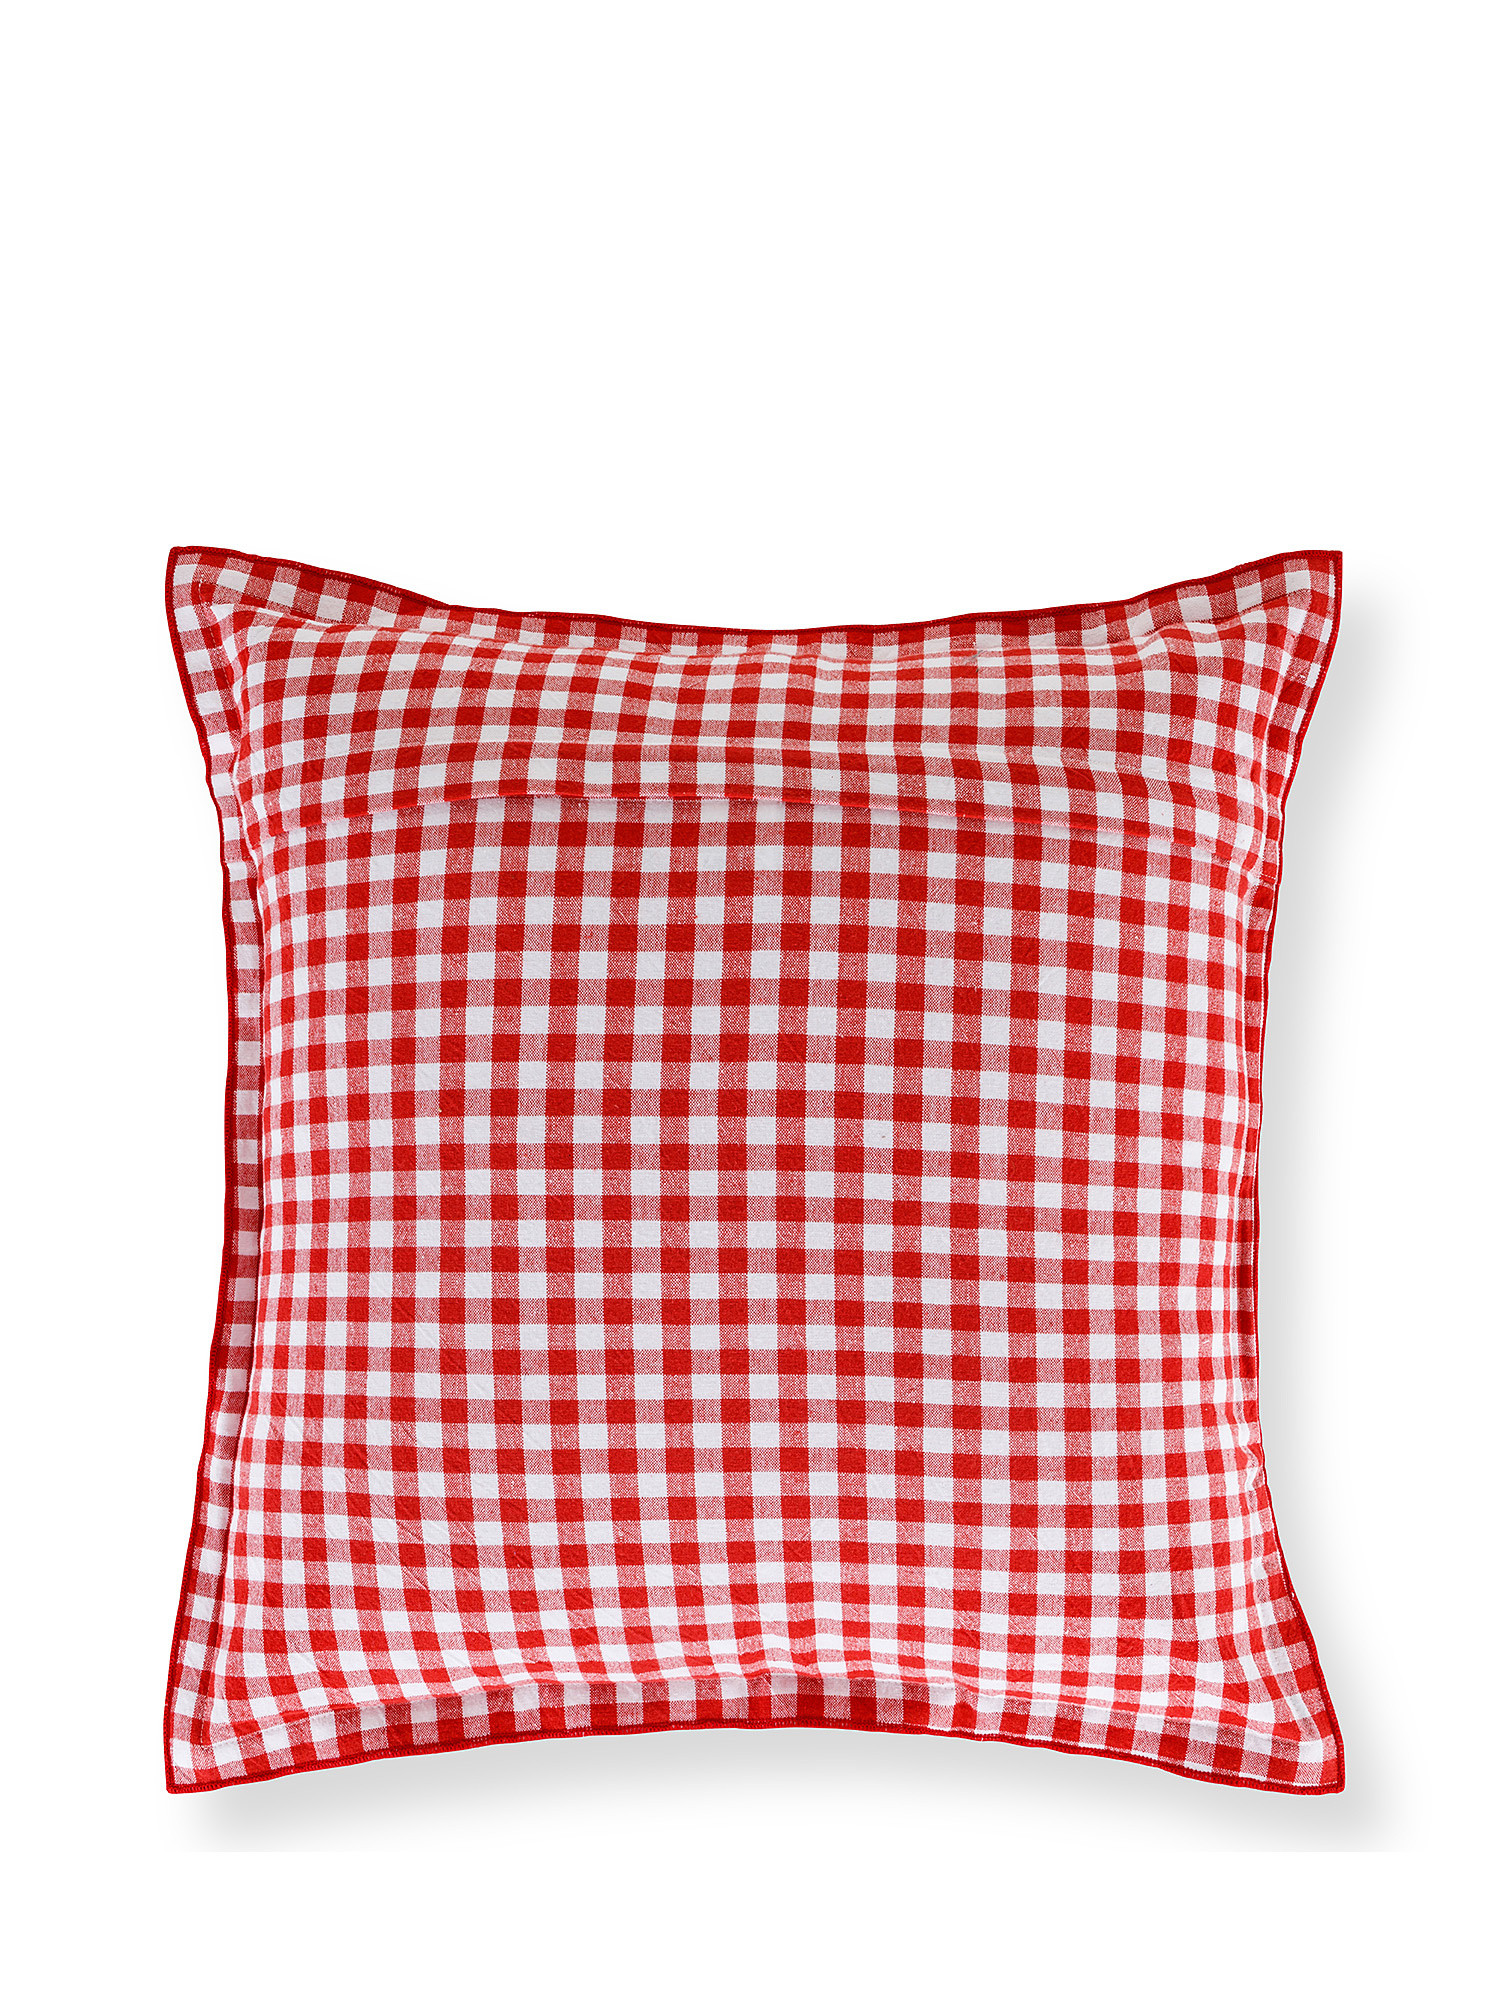 Cuscino cotone motivo vichy 45x45cm, Rosso, large image number 1